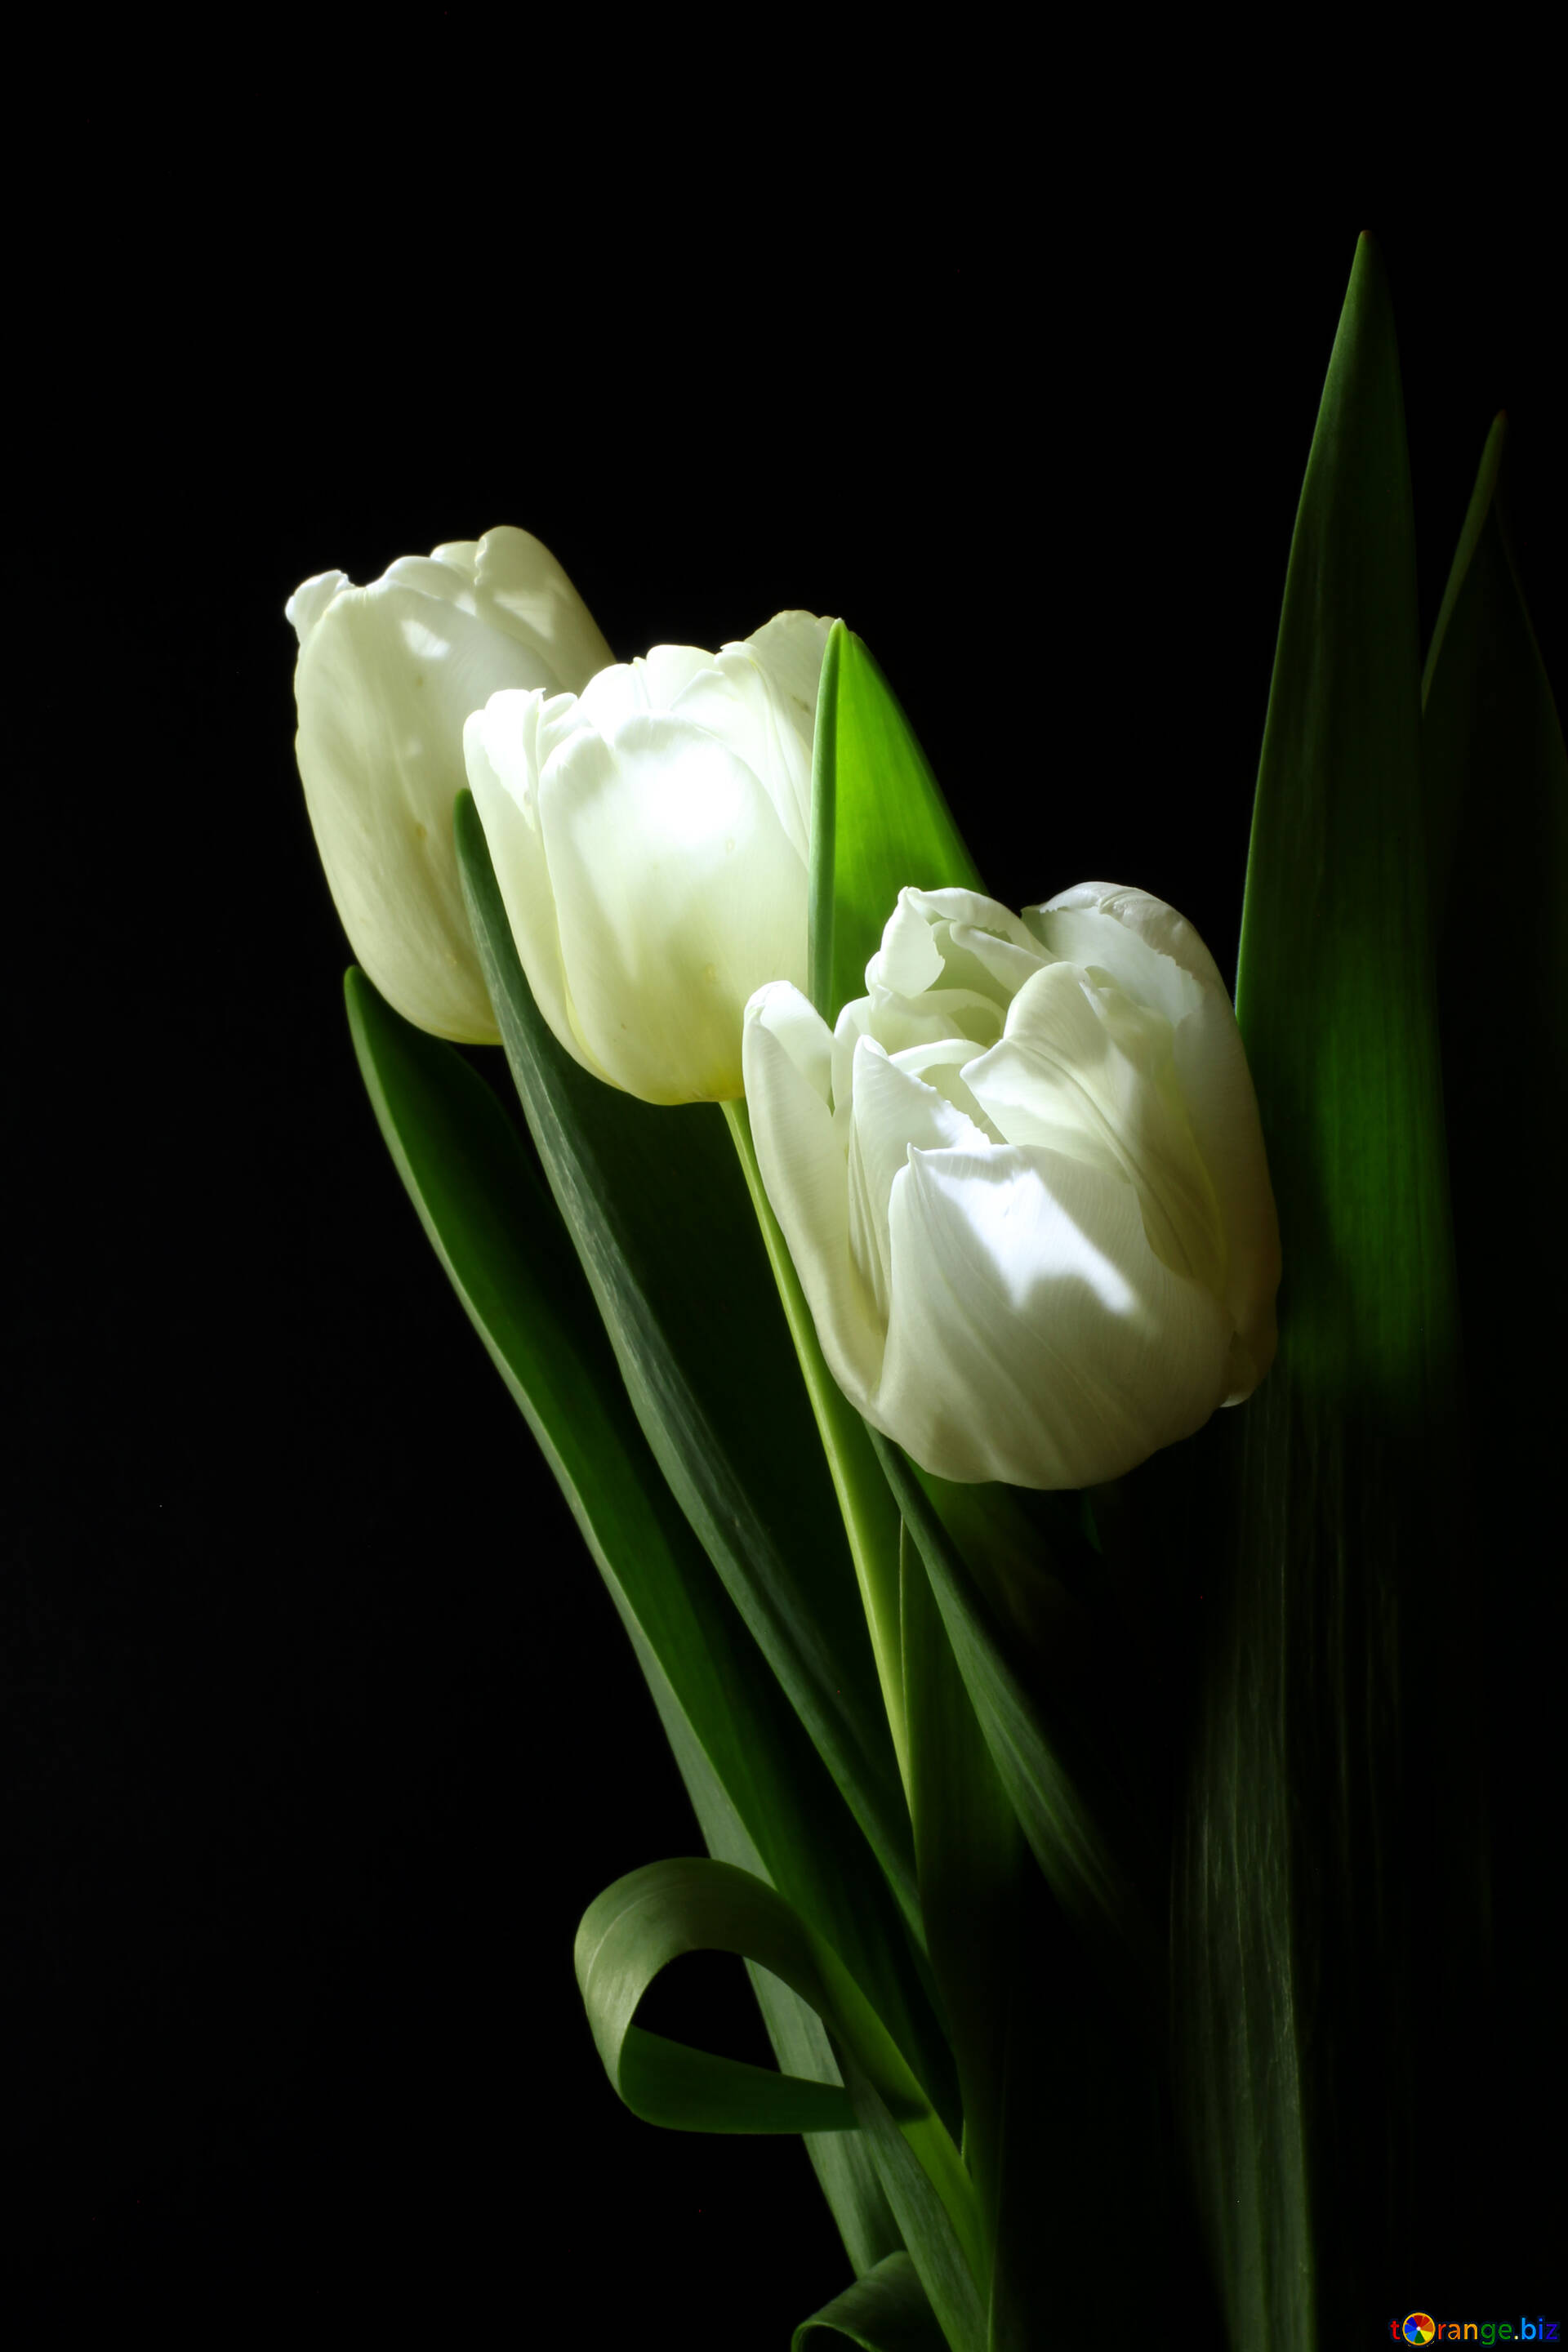 Tulips On A Dark Background Tulips Bouquet On A Black Background Tulip 46273